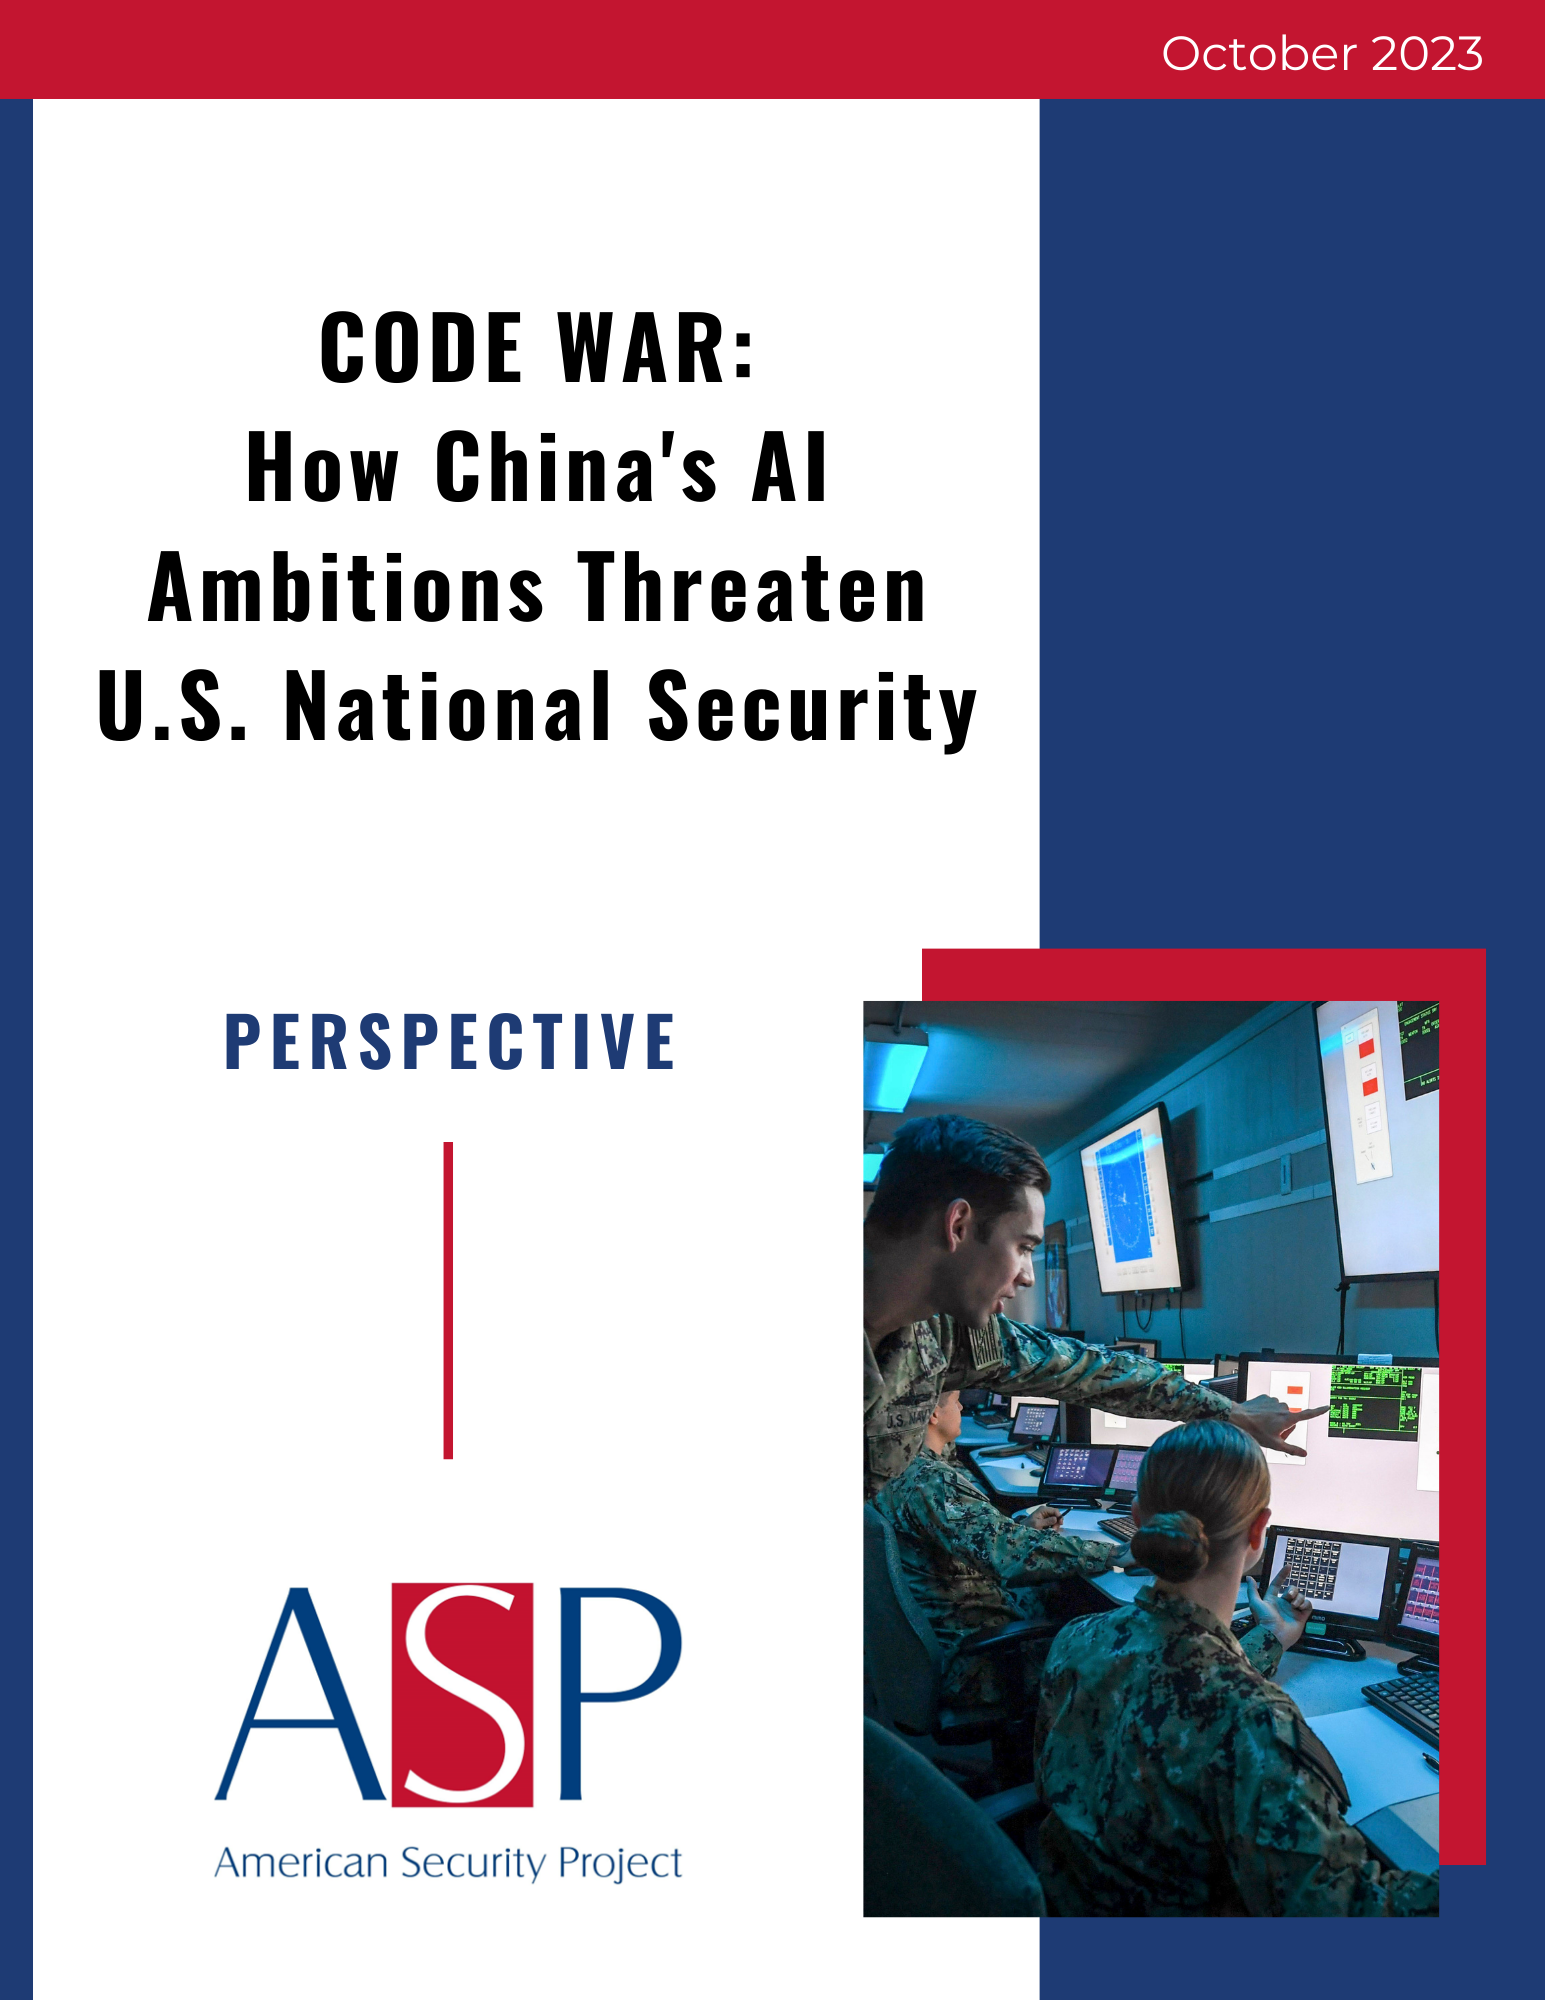 Perspective – Code War: How China’s AI Ambitions Threaten U.S. National Security